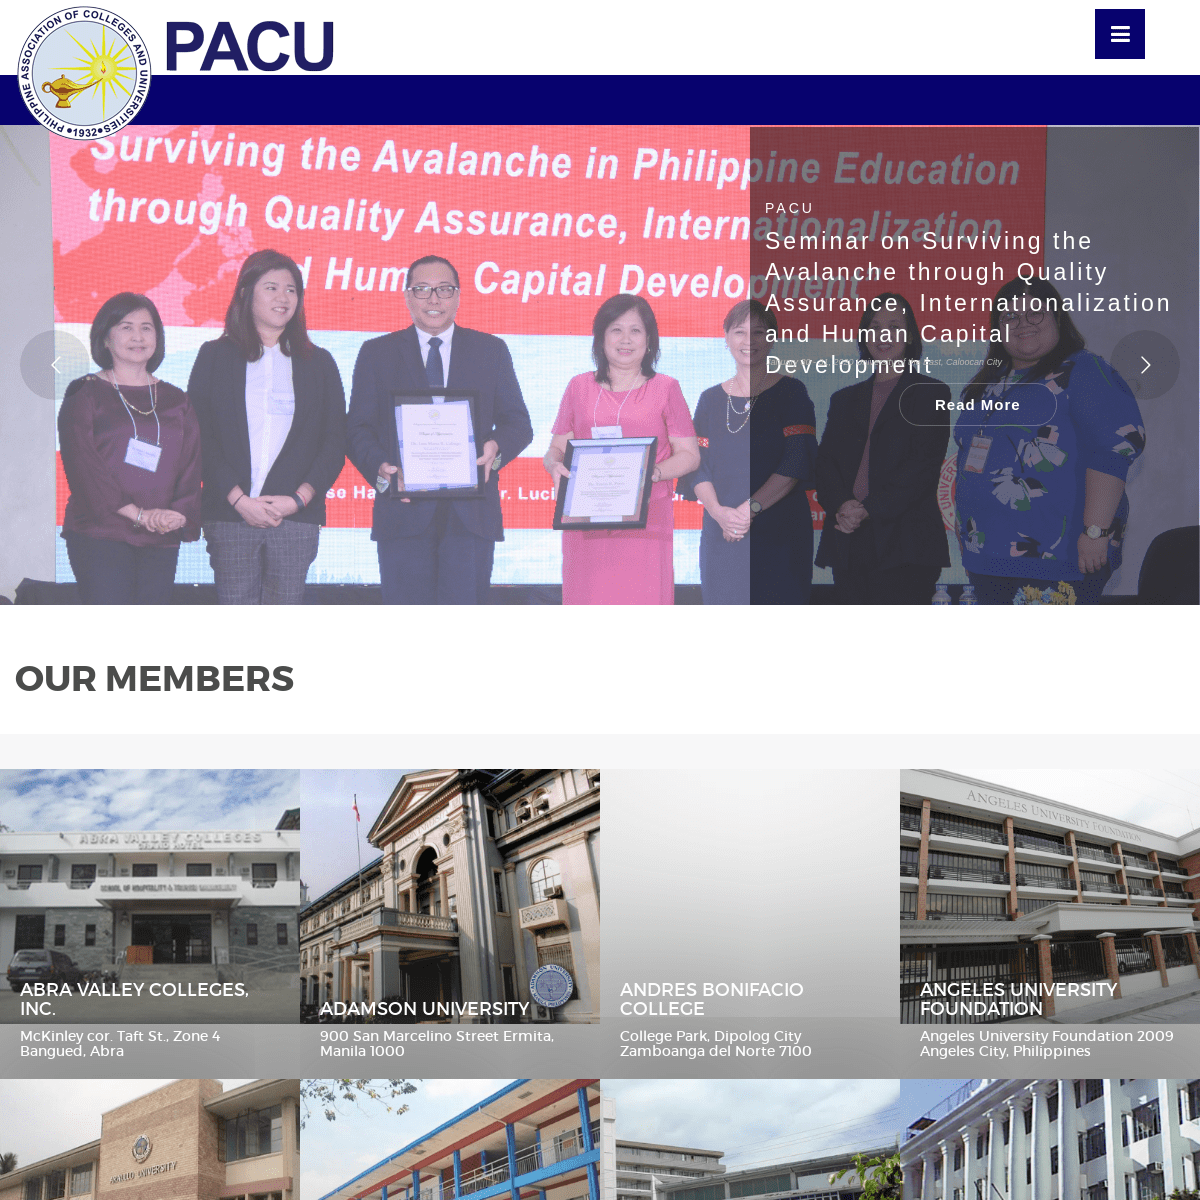 A complete backup of pacu.org.ph